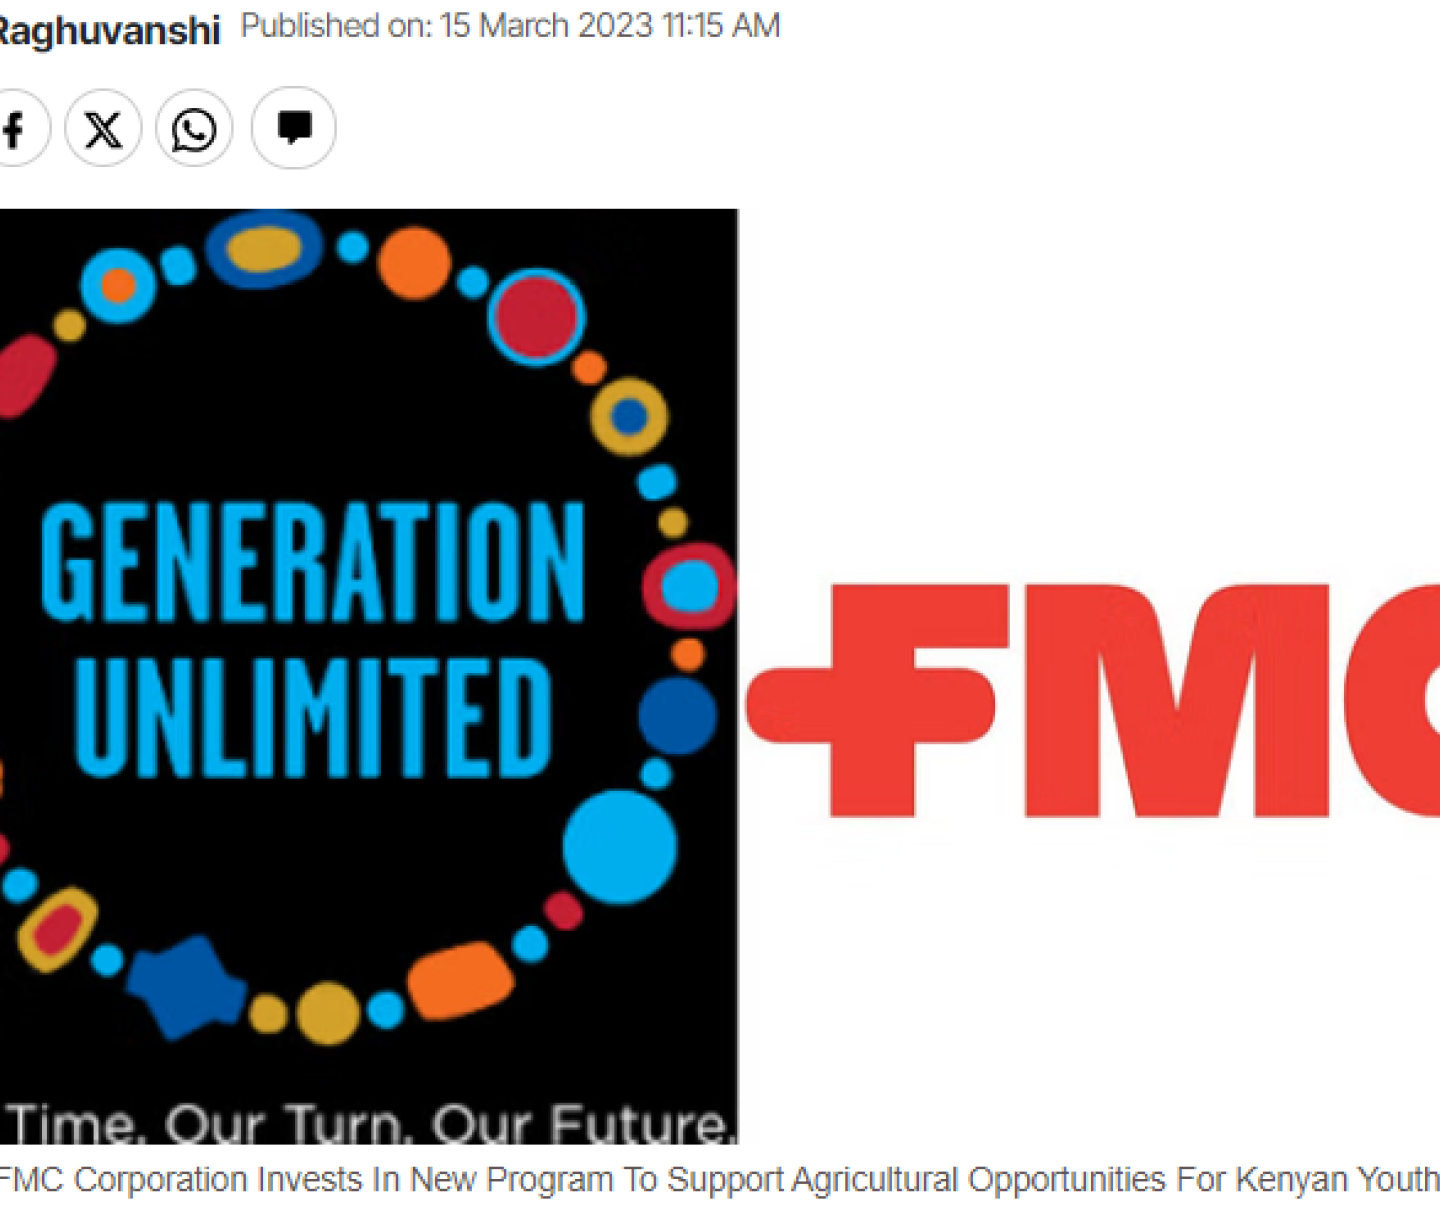 Generation unlimited with FMC